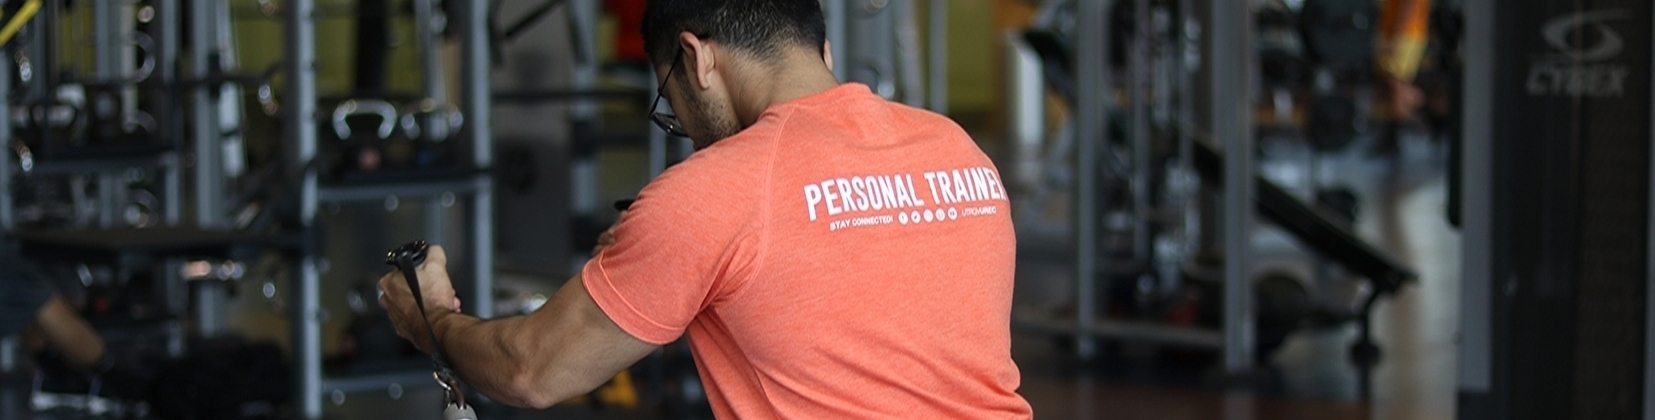 Personal Training banner